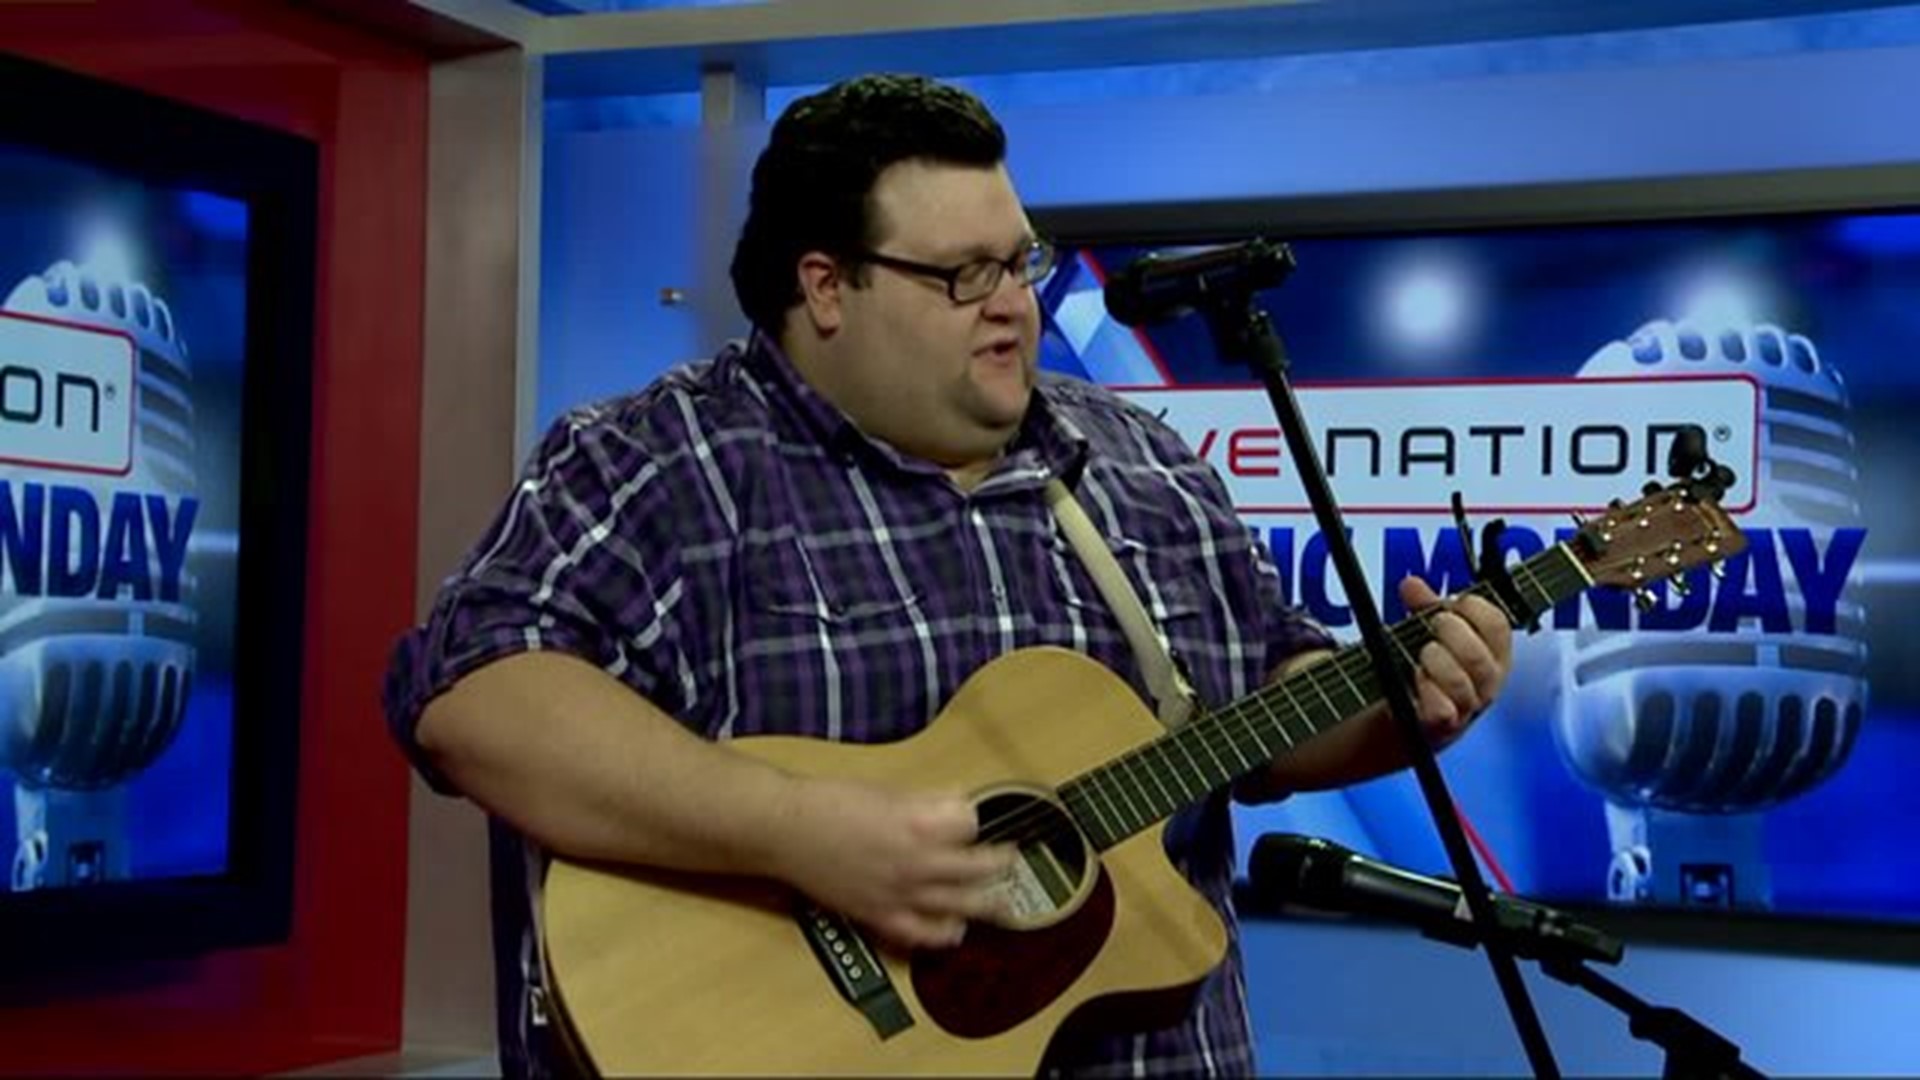 Groove on the accoustic stylings of Austin Criswell from Boiling Springs